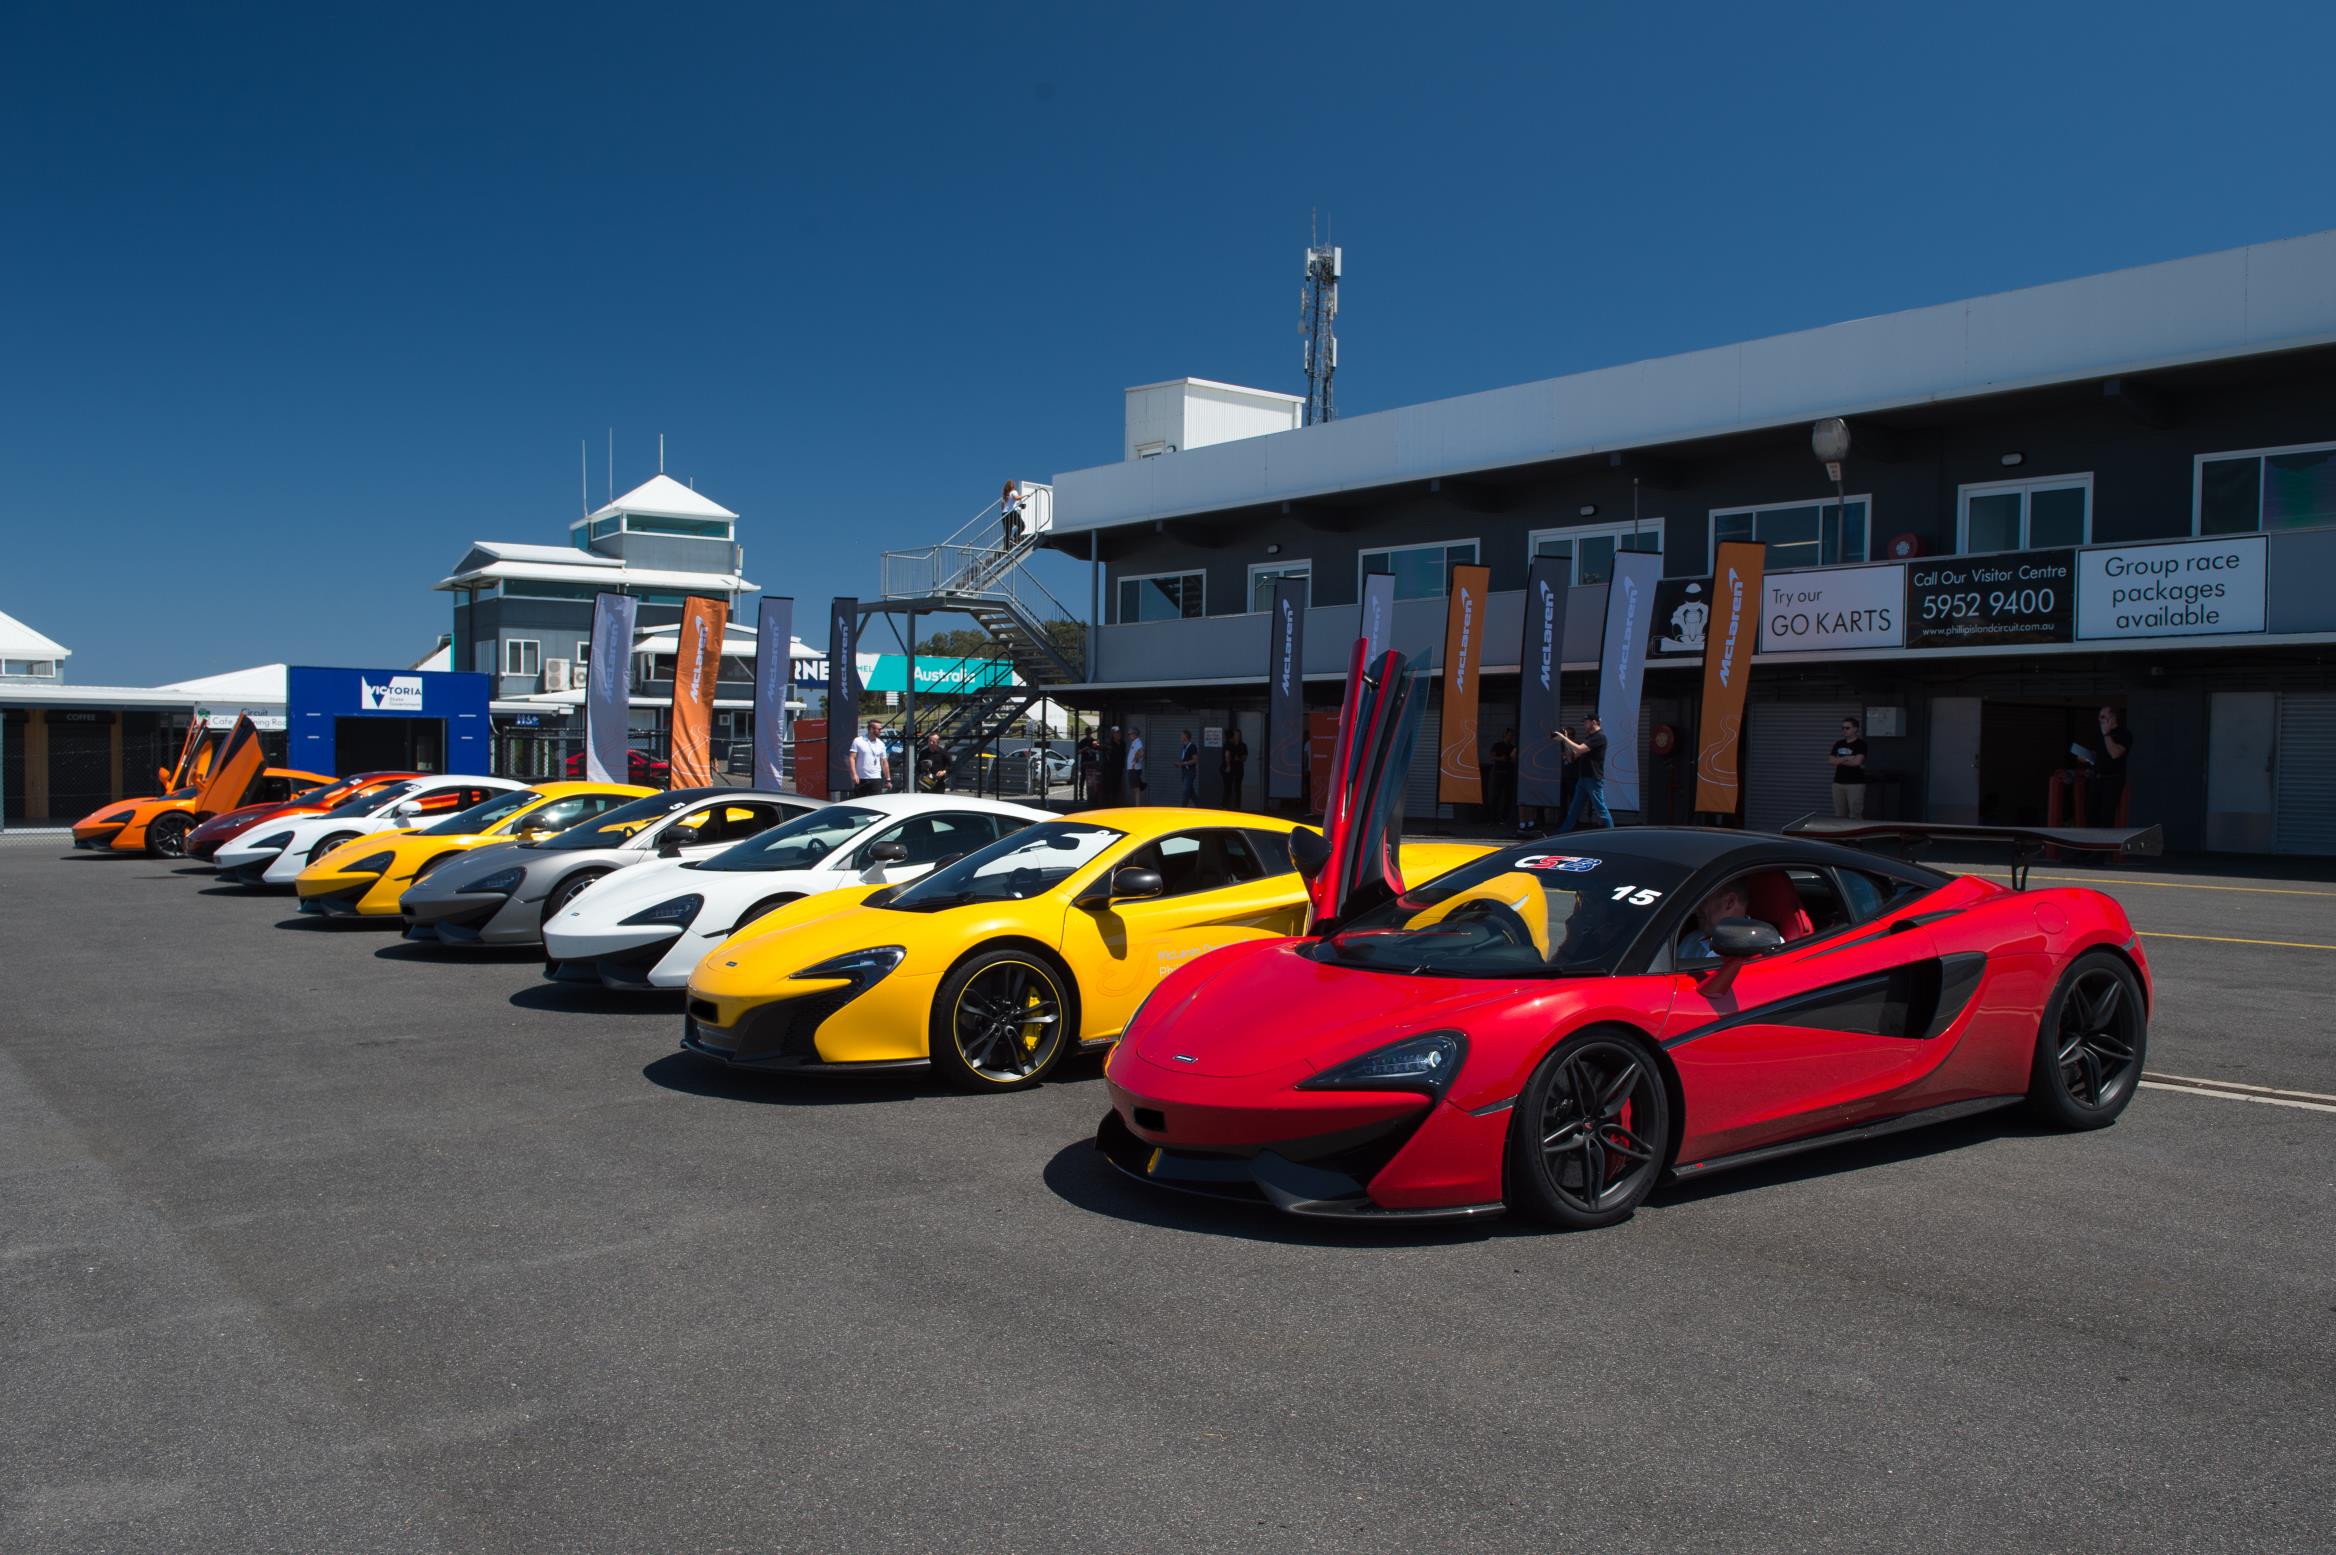 A track day provides a high-octane day out for Dads